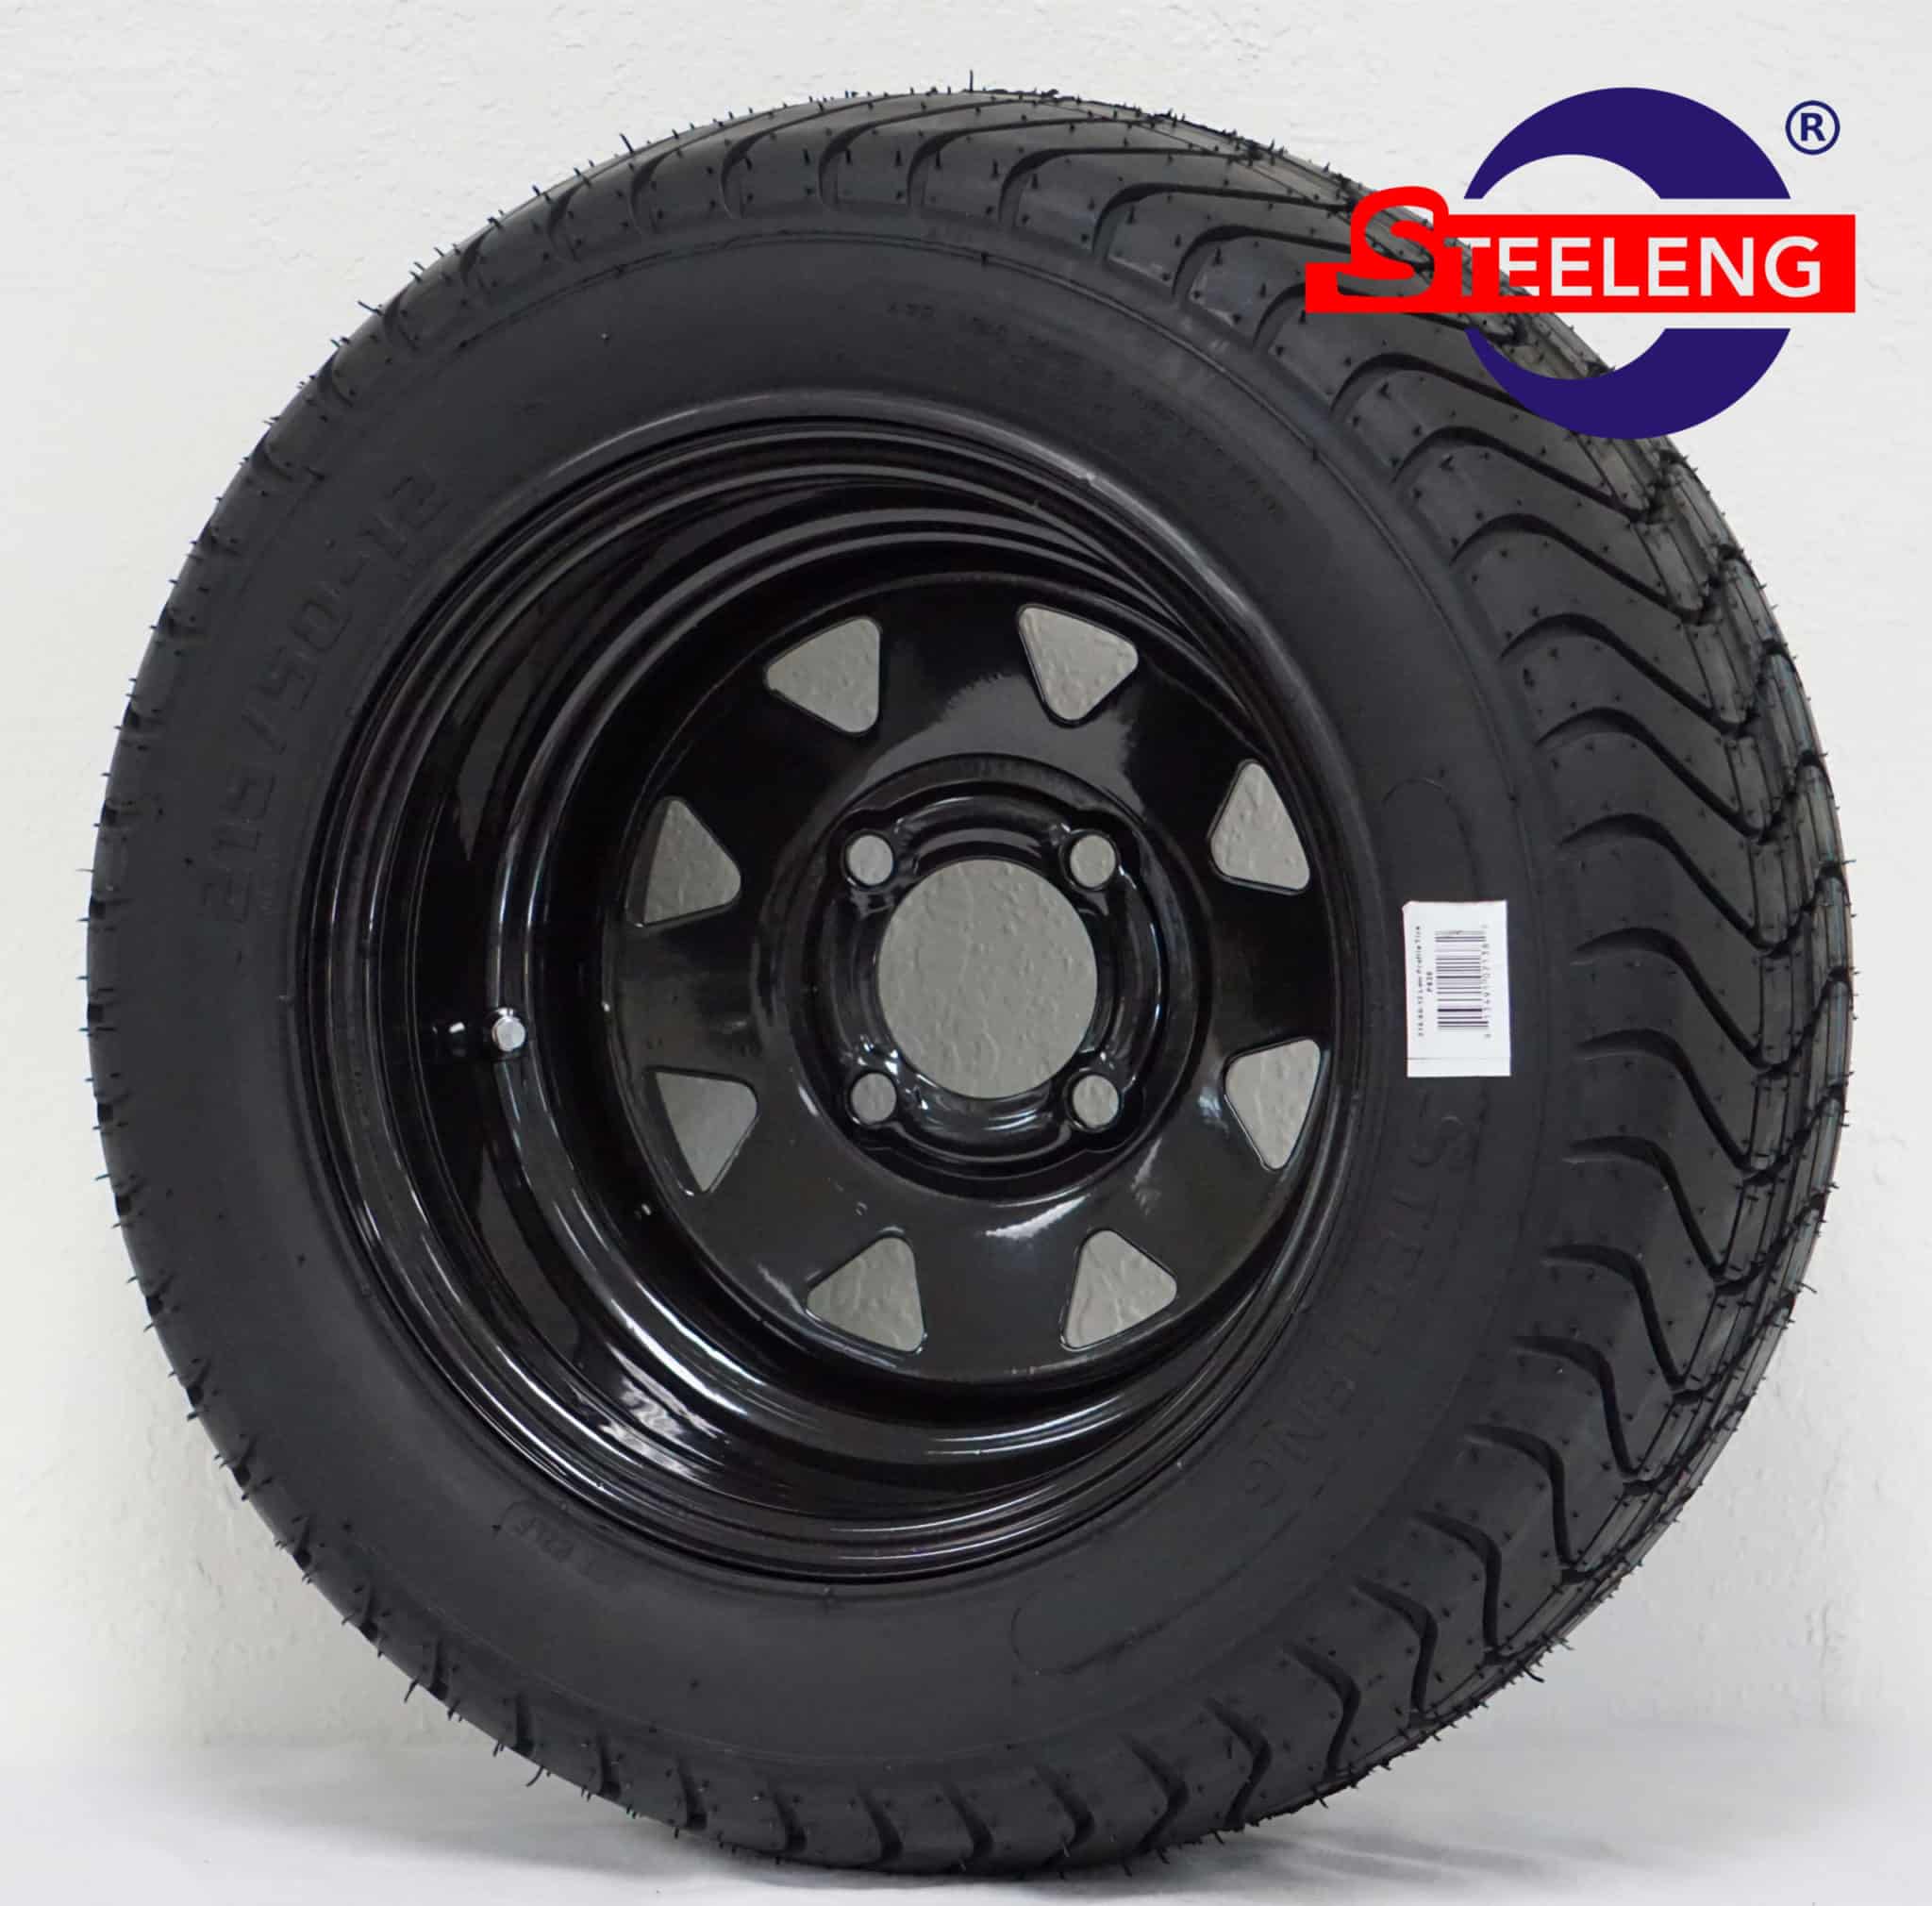 12" x 7" Black Slotted Steel Wheel & 215/50-12 Comfort Ride Street Tire DOT Approved